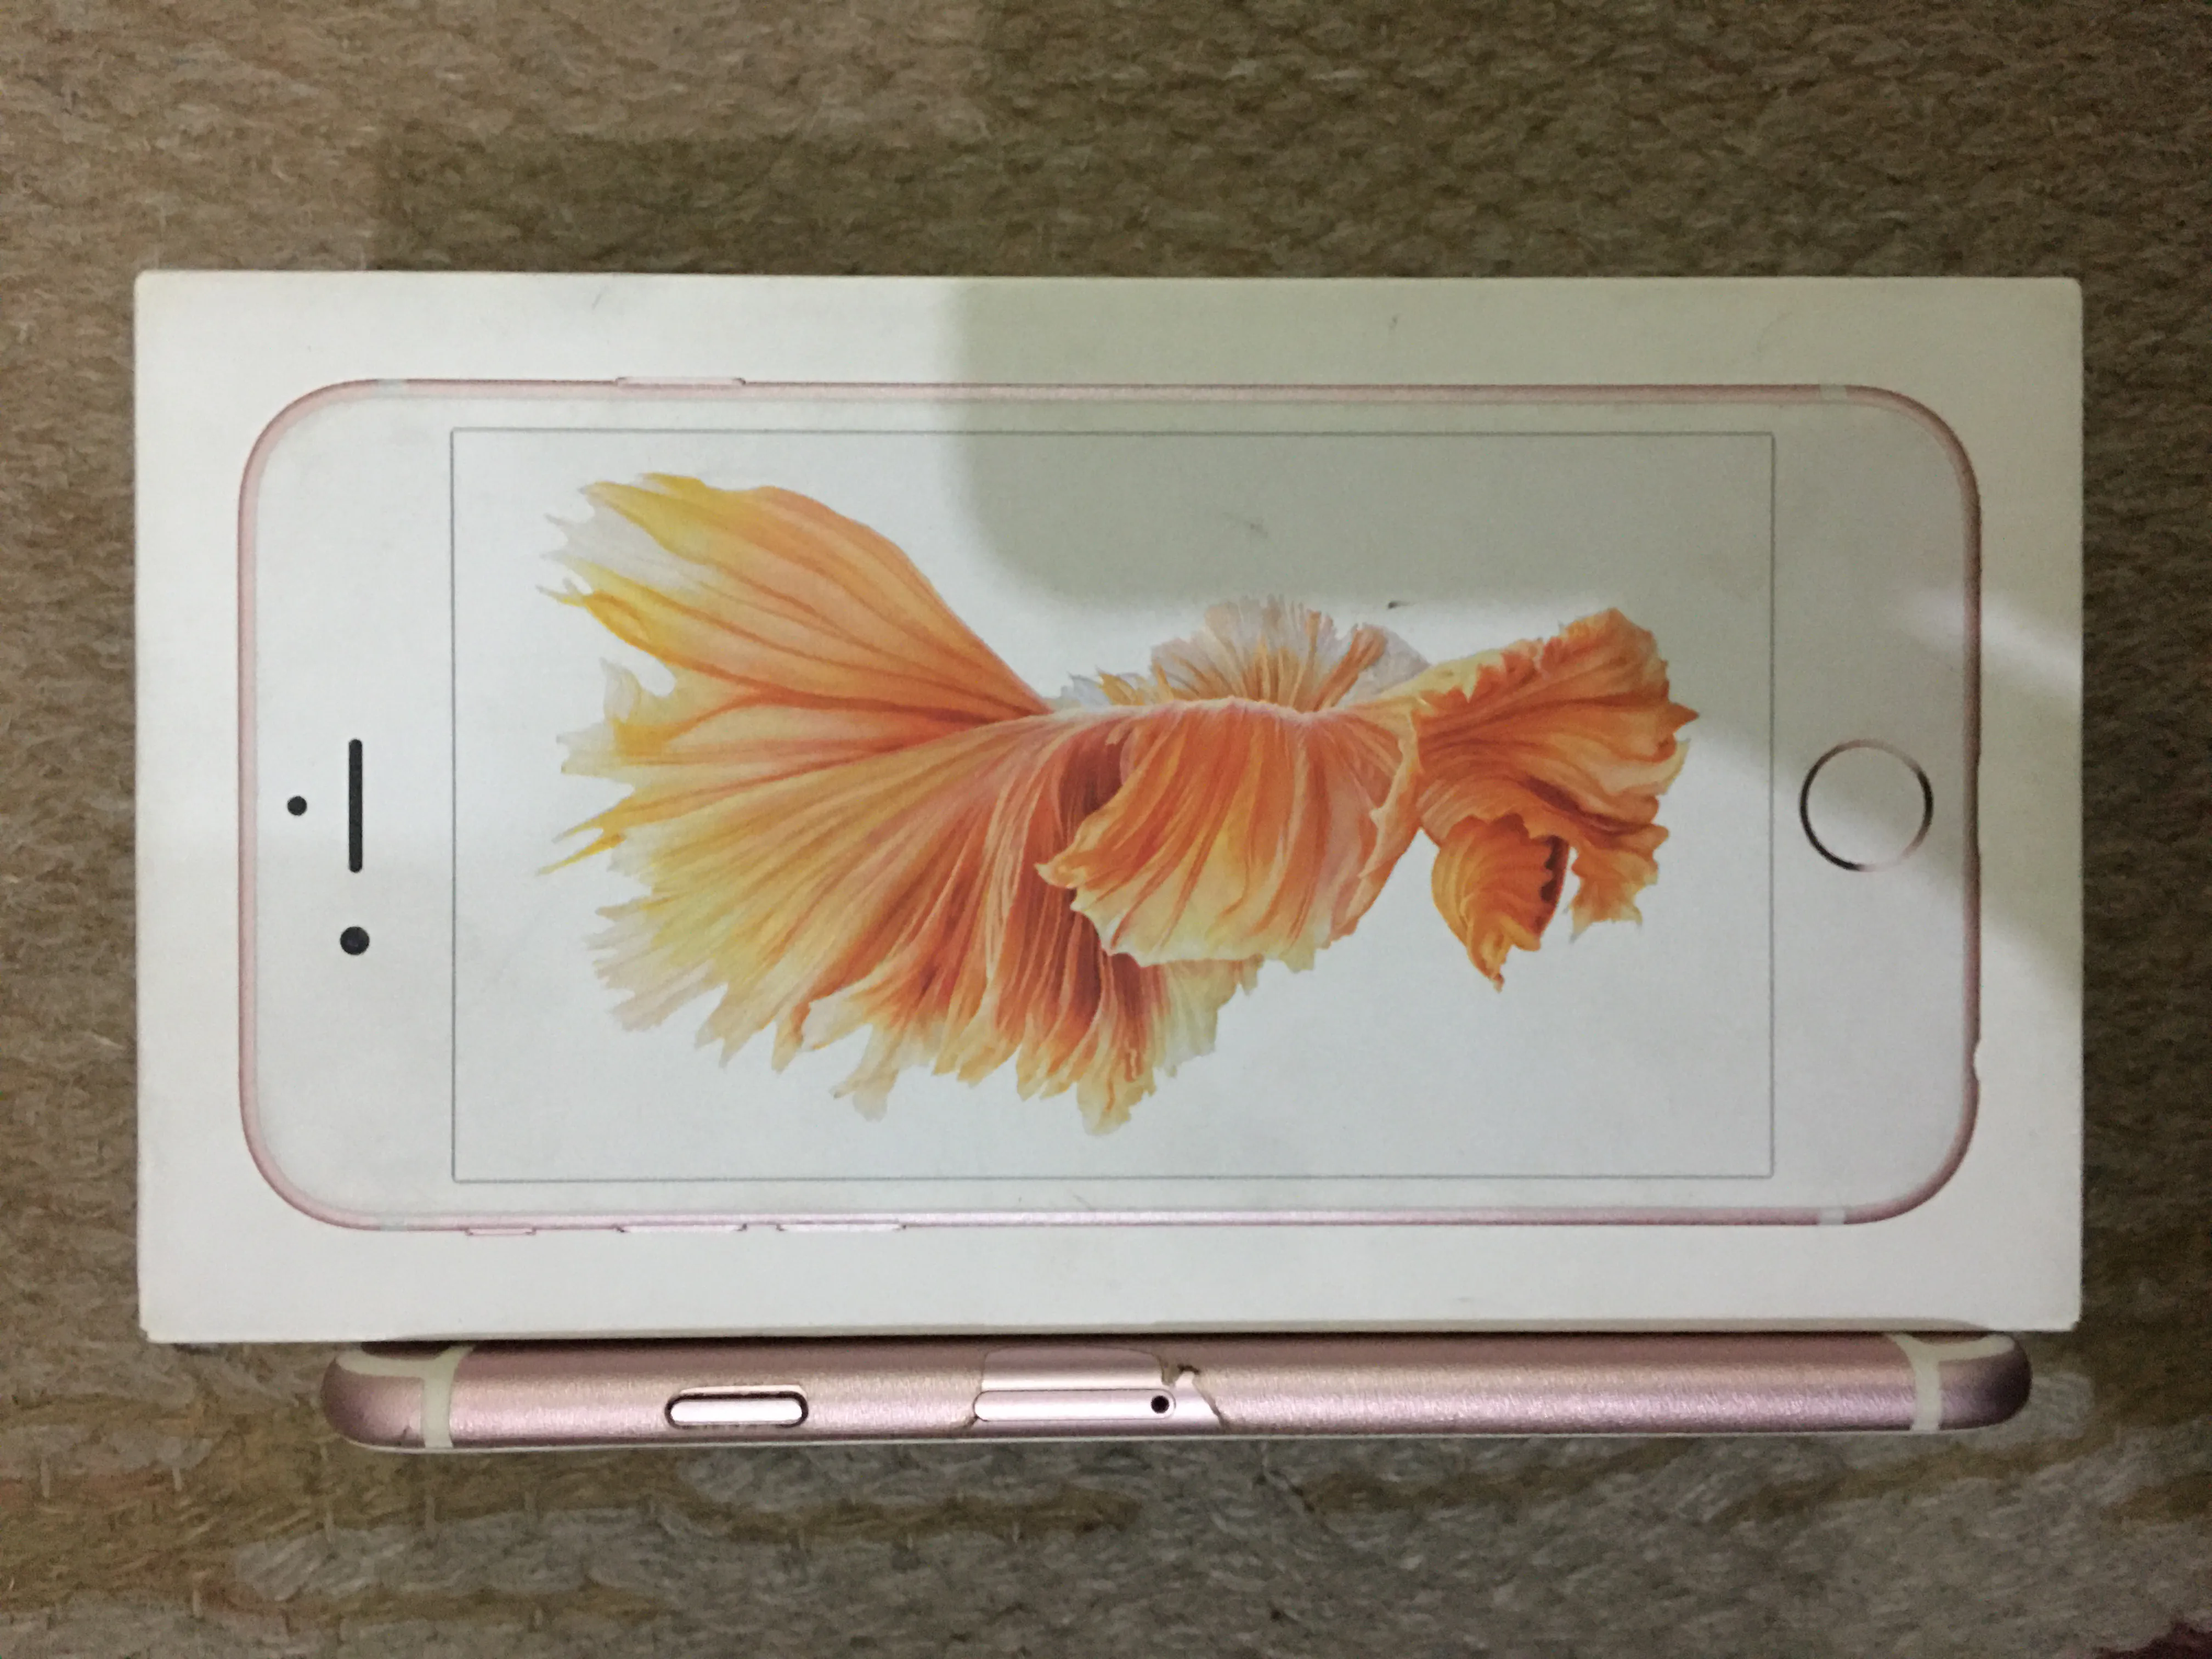 Iphone 6s Rose Gold 10/10 (16 GB) for sale - photo 3